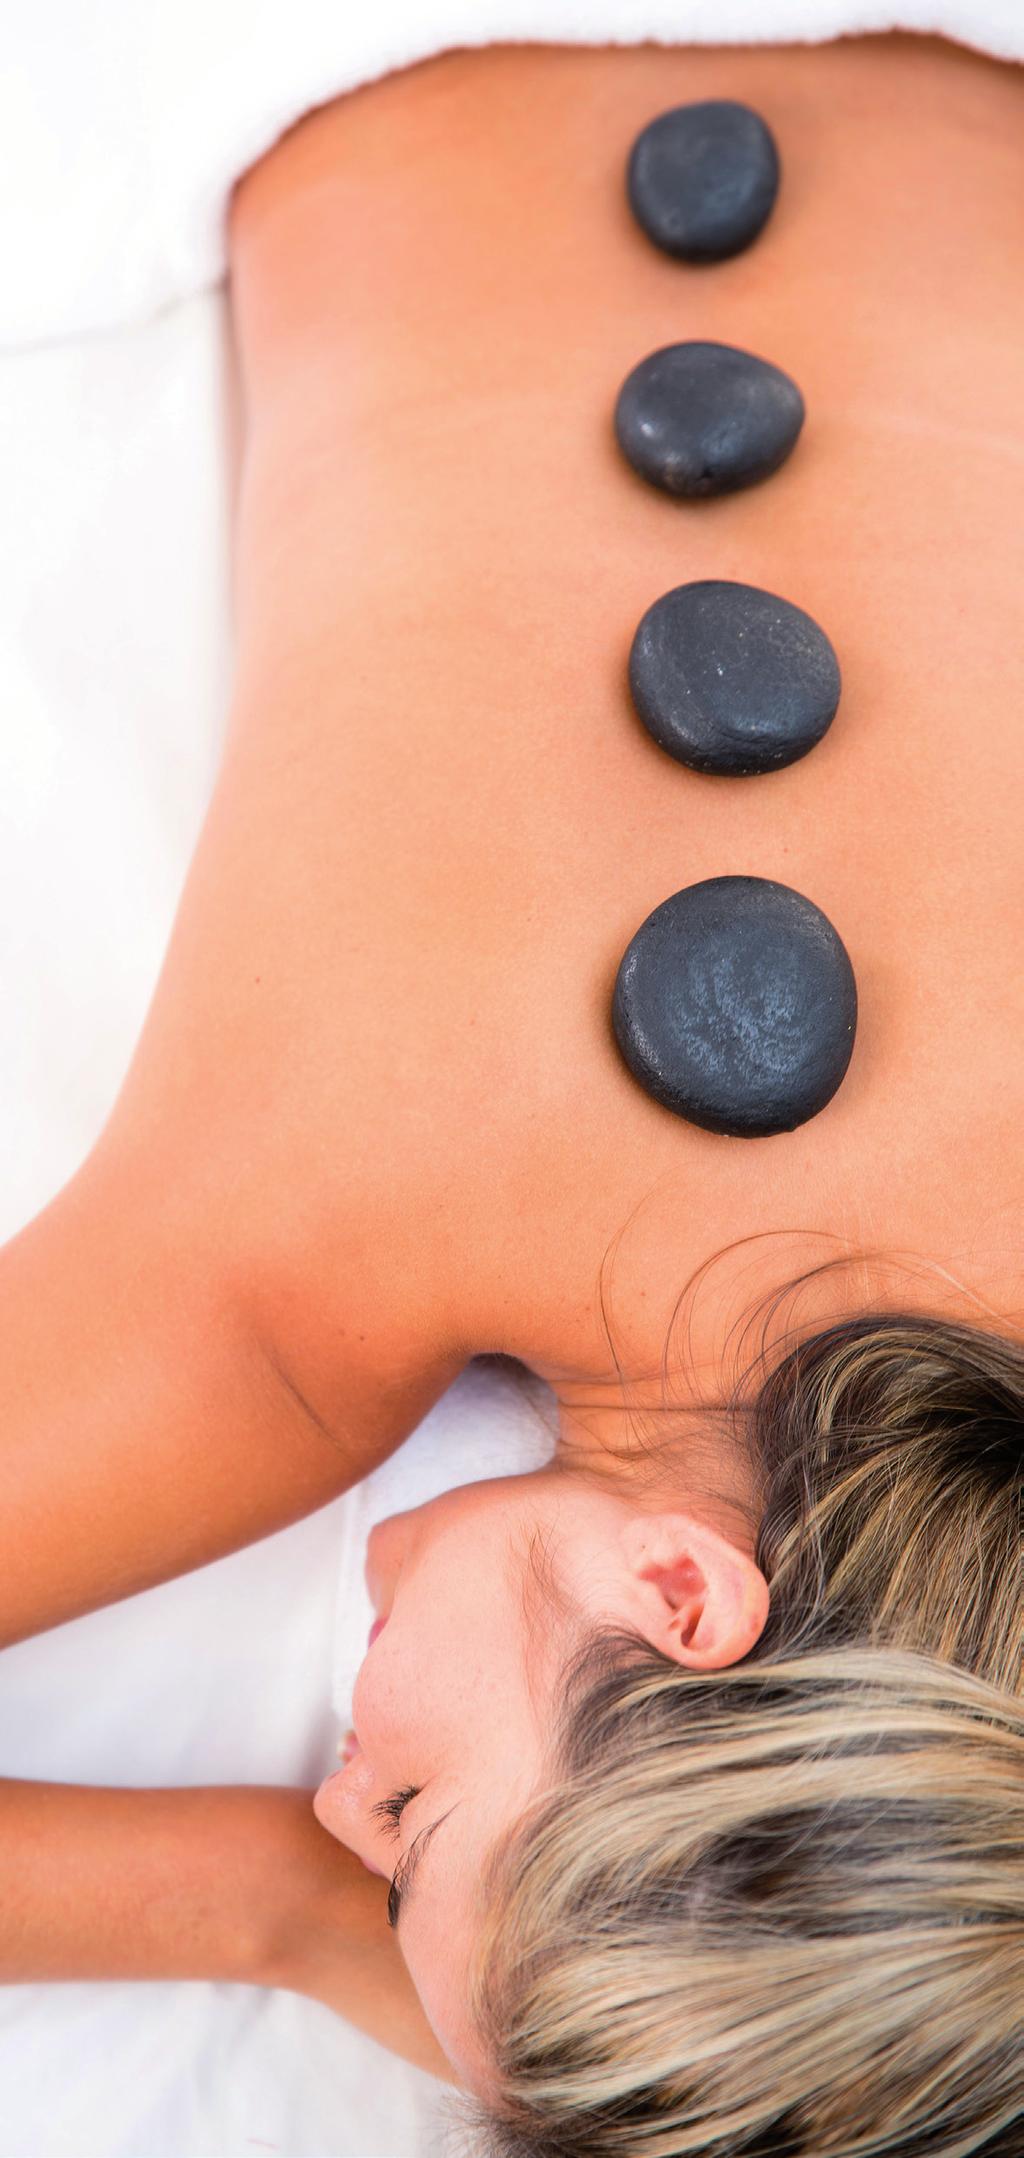 MASSAGE & SPA BODY TREATMENTS MASSAGE Restore balance, indulge your senses, soothe away the stress, and reinvigorate your mind, body and soul with a luxurious massage or spa body treatment.